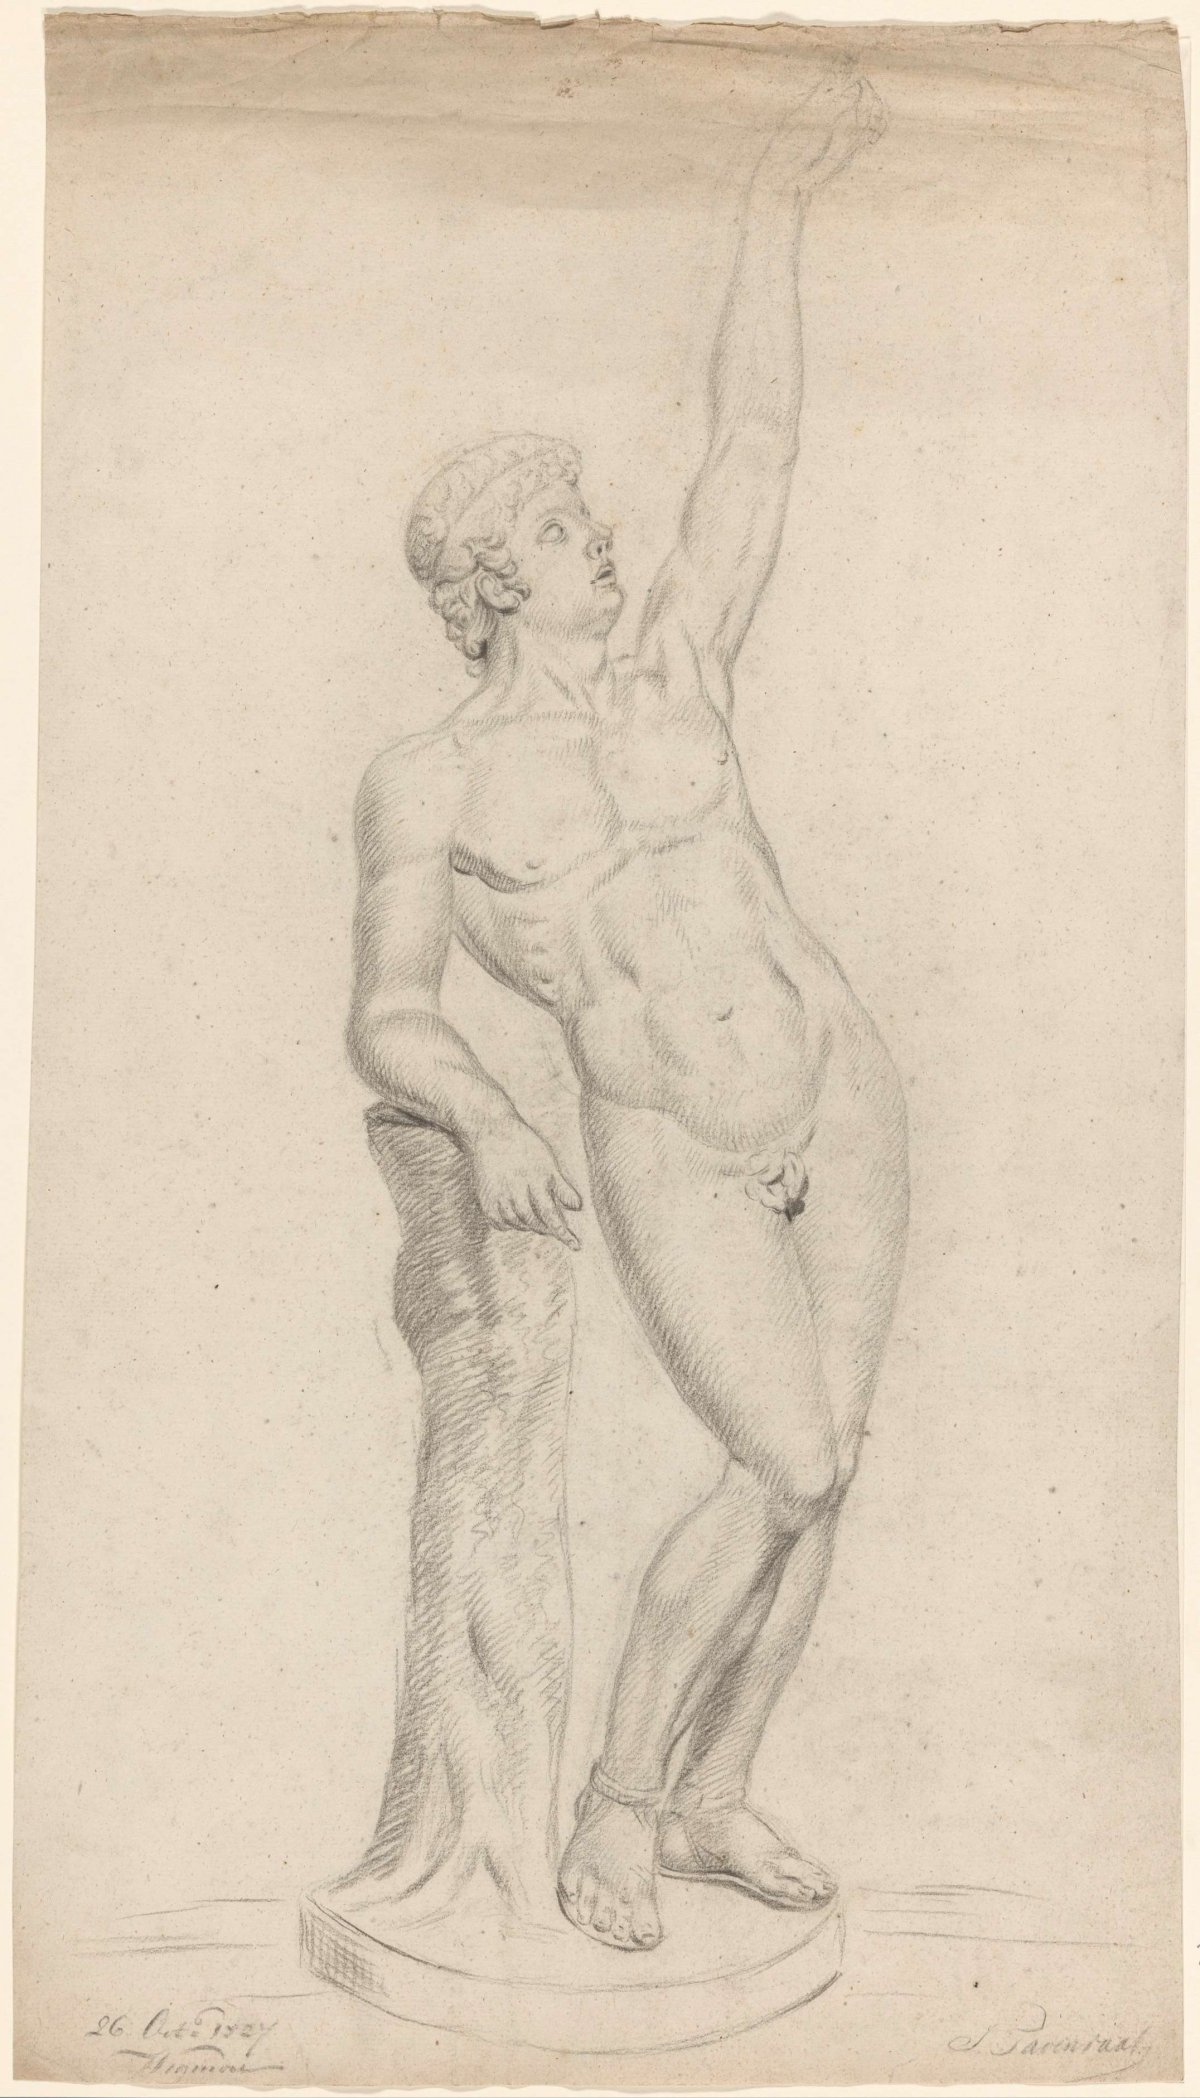 Plaster of antique statue of standing nude man, with left arm raised, Johannes Tavenraat, 1827